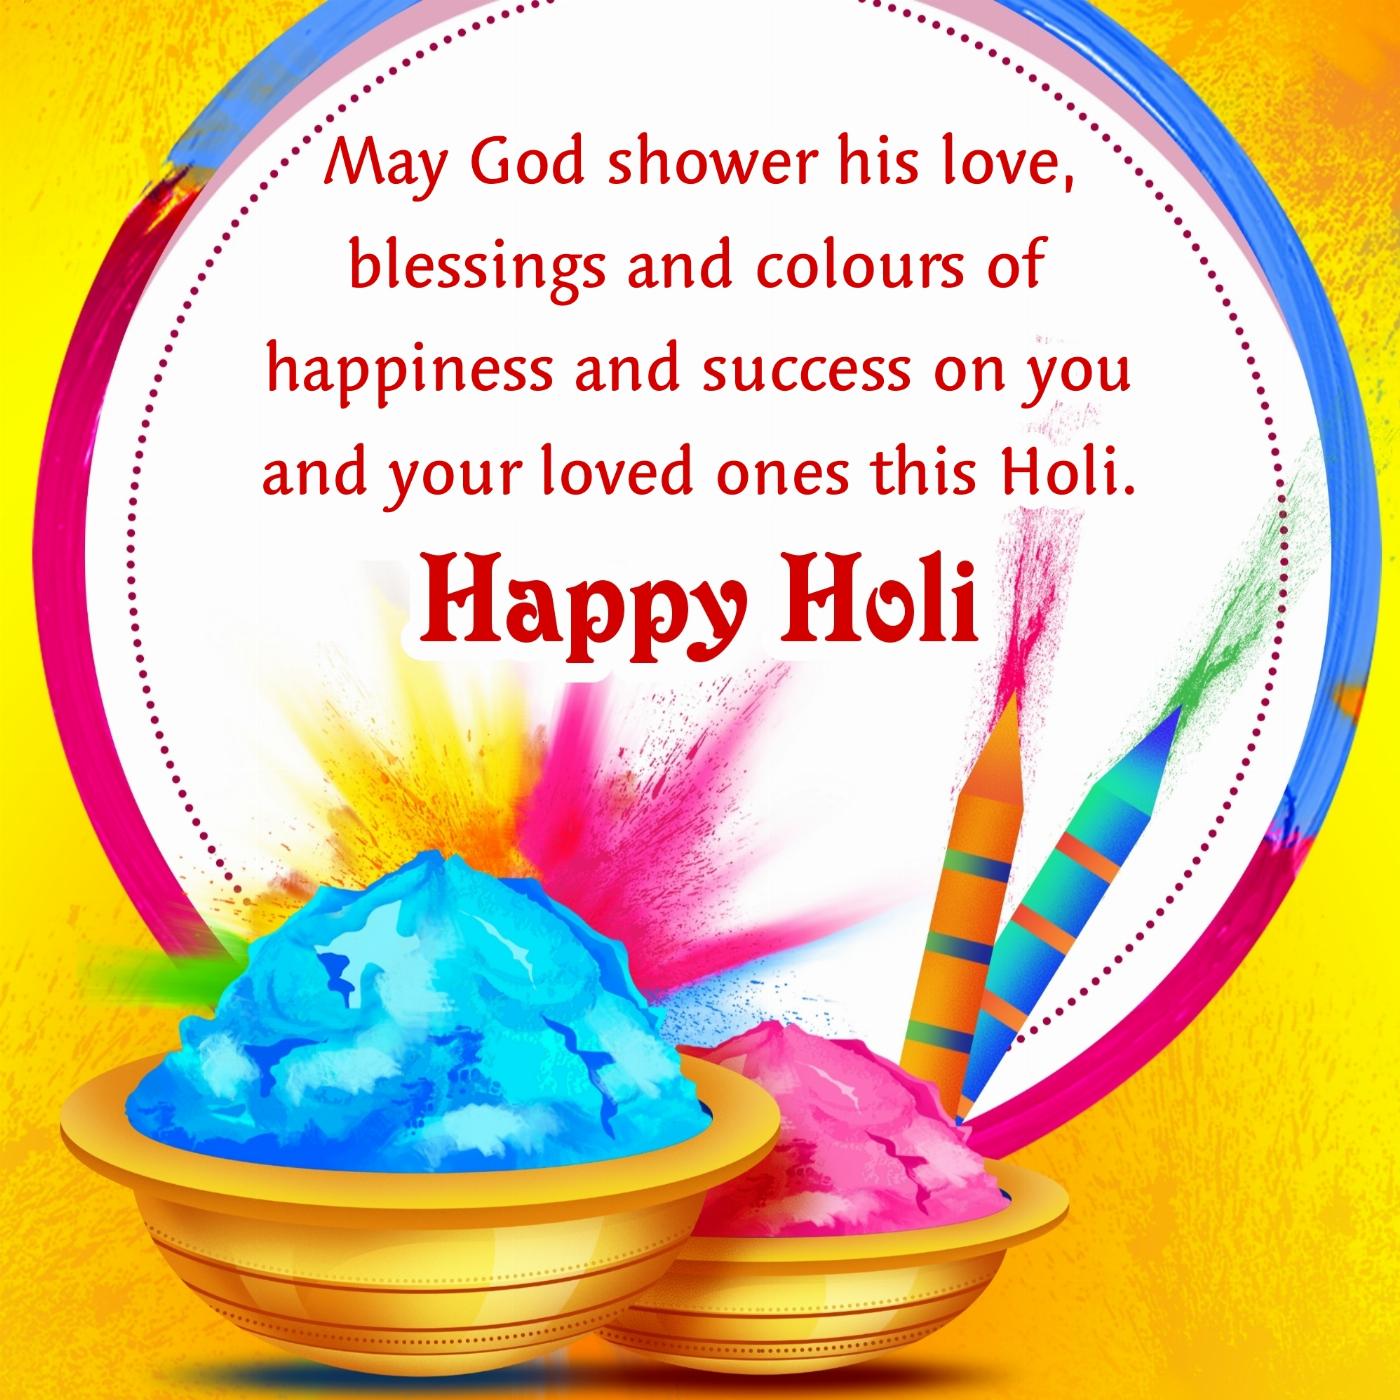 May God shower his love blessings and colours of happiness